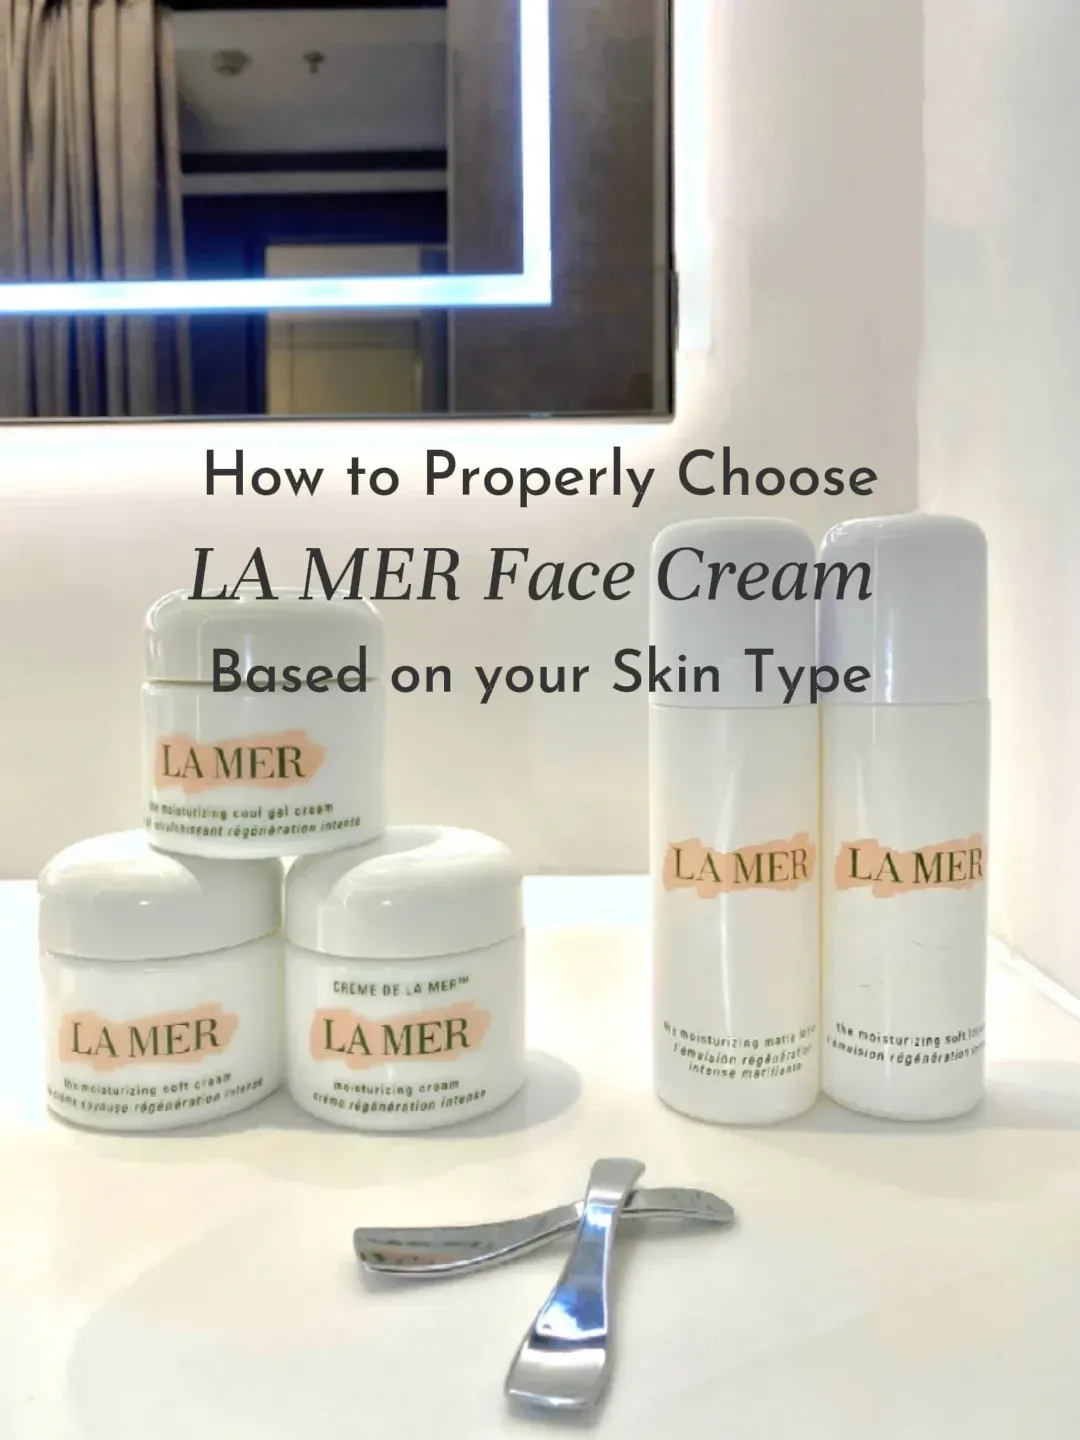 Best Dupes for The Moisturizing Soft Cream by La Mer